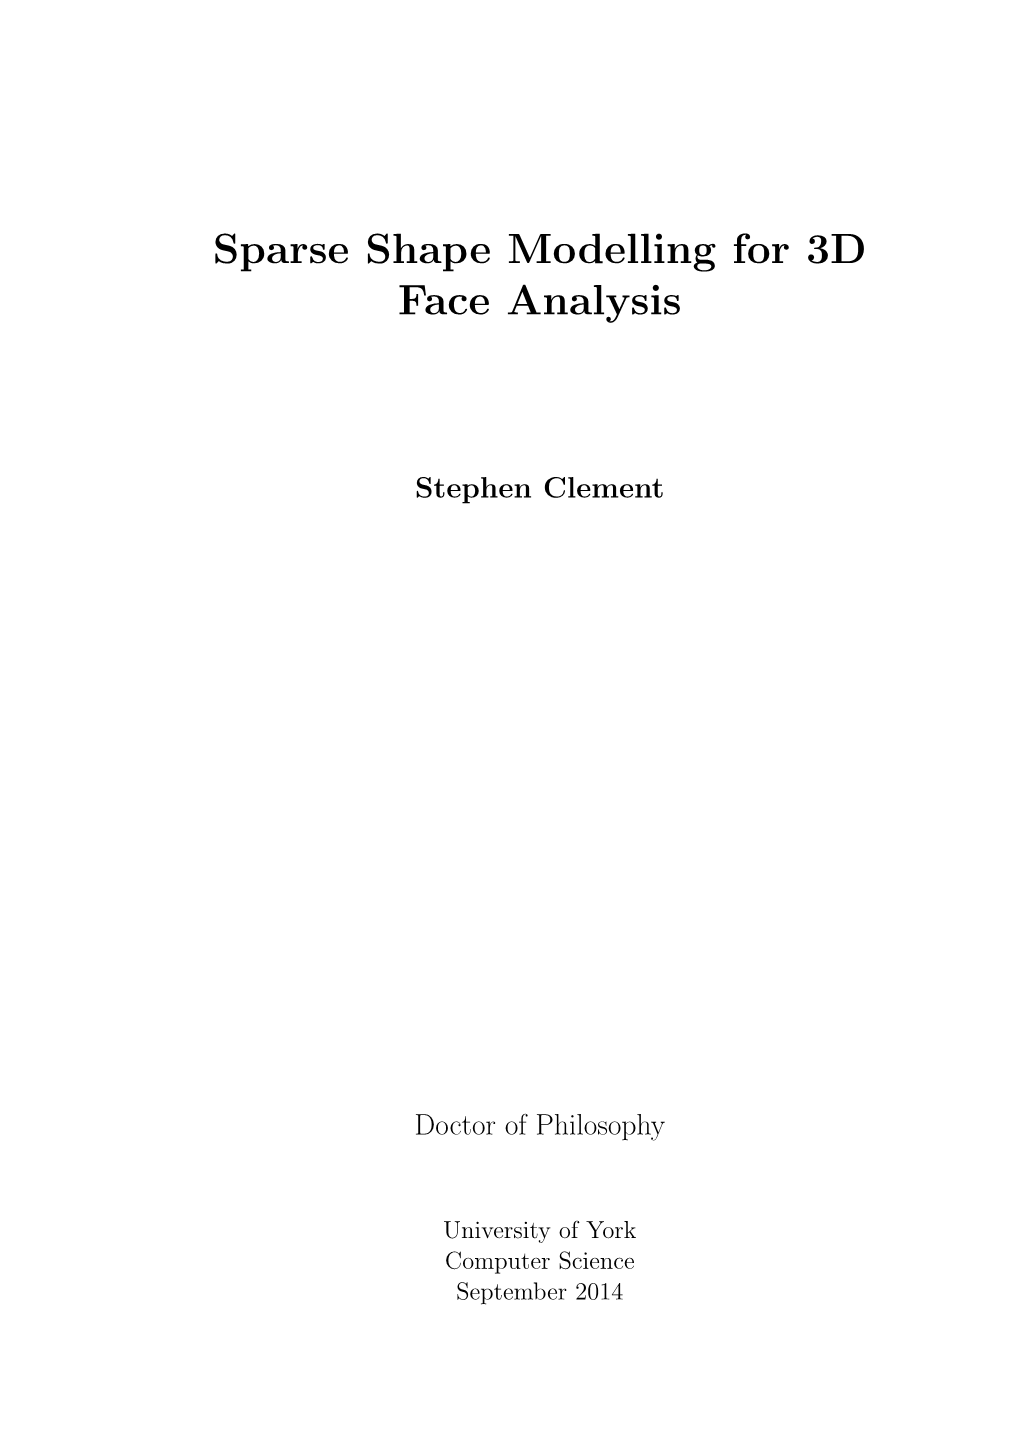 Sparse Shape Modelling for 3D Face Analysis